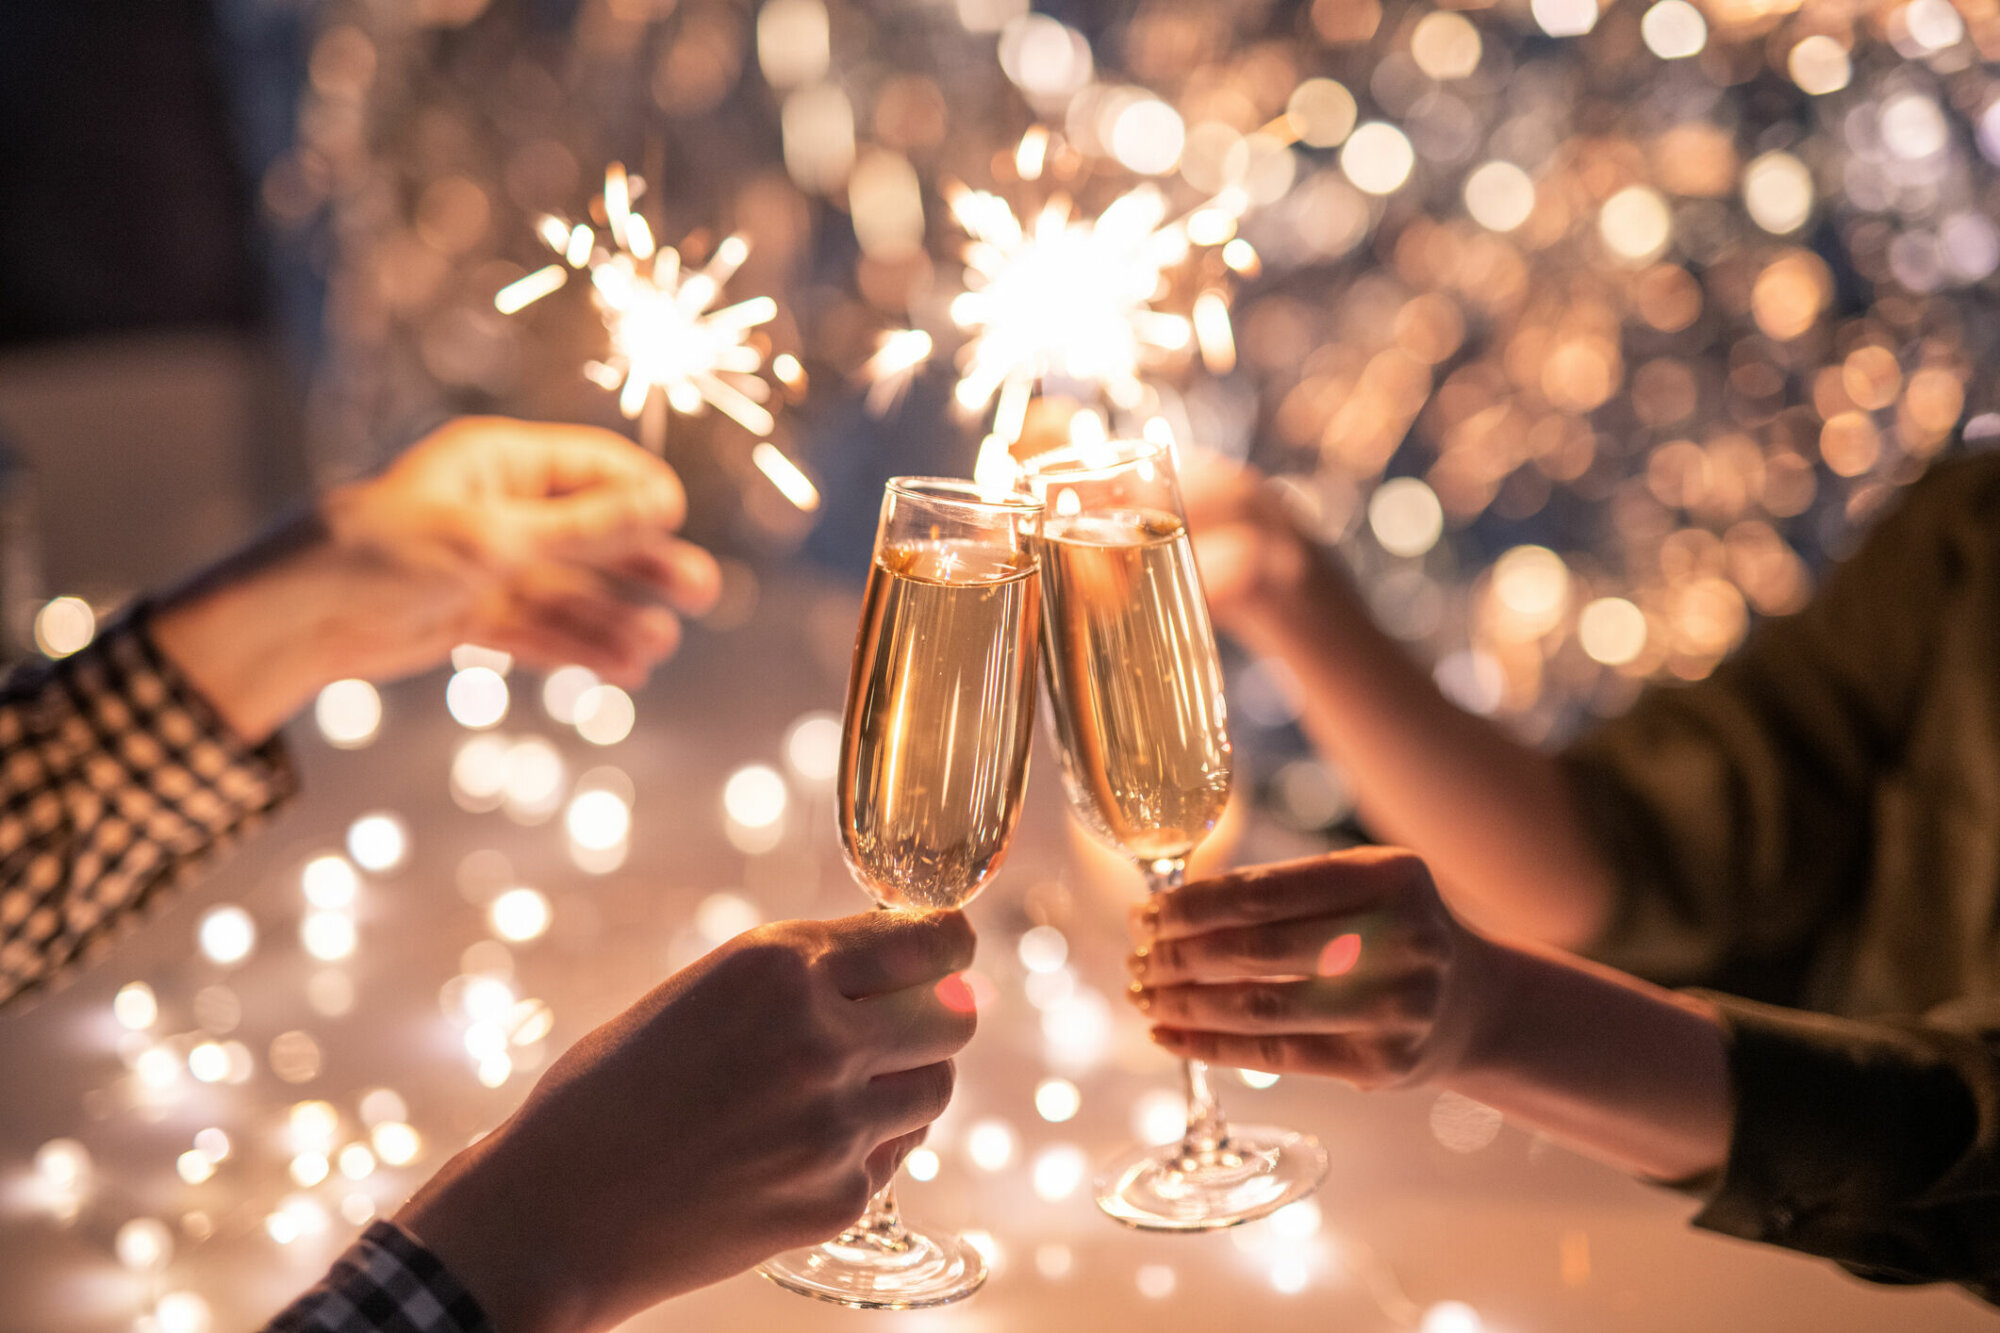 Ringing in the new year with a bottle of bubbly? A brief history